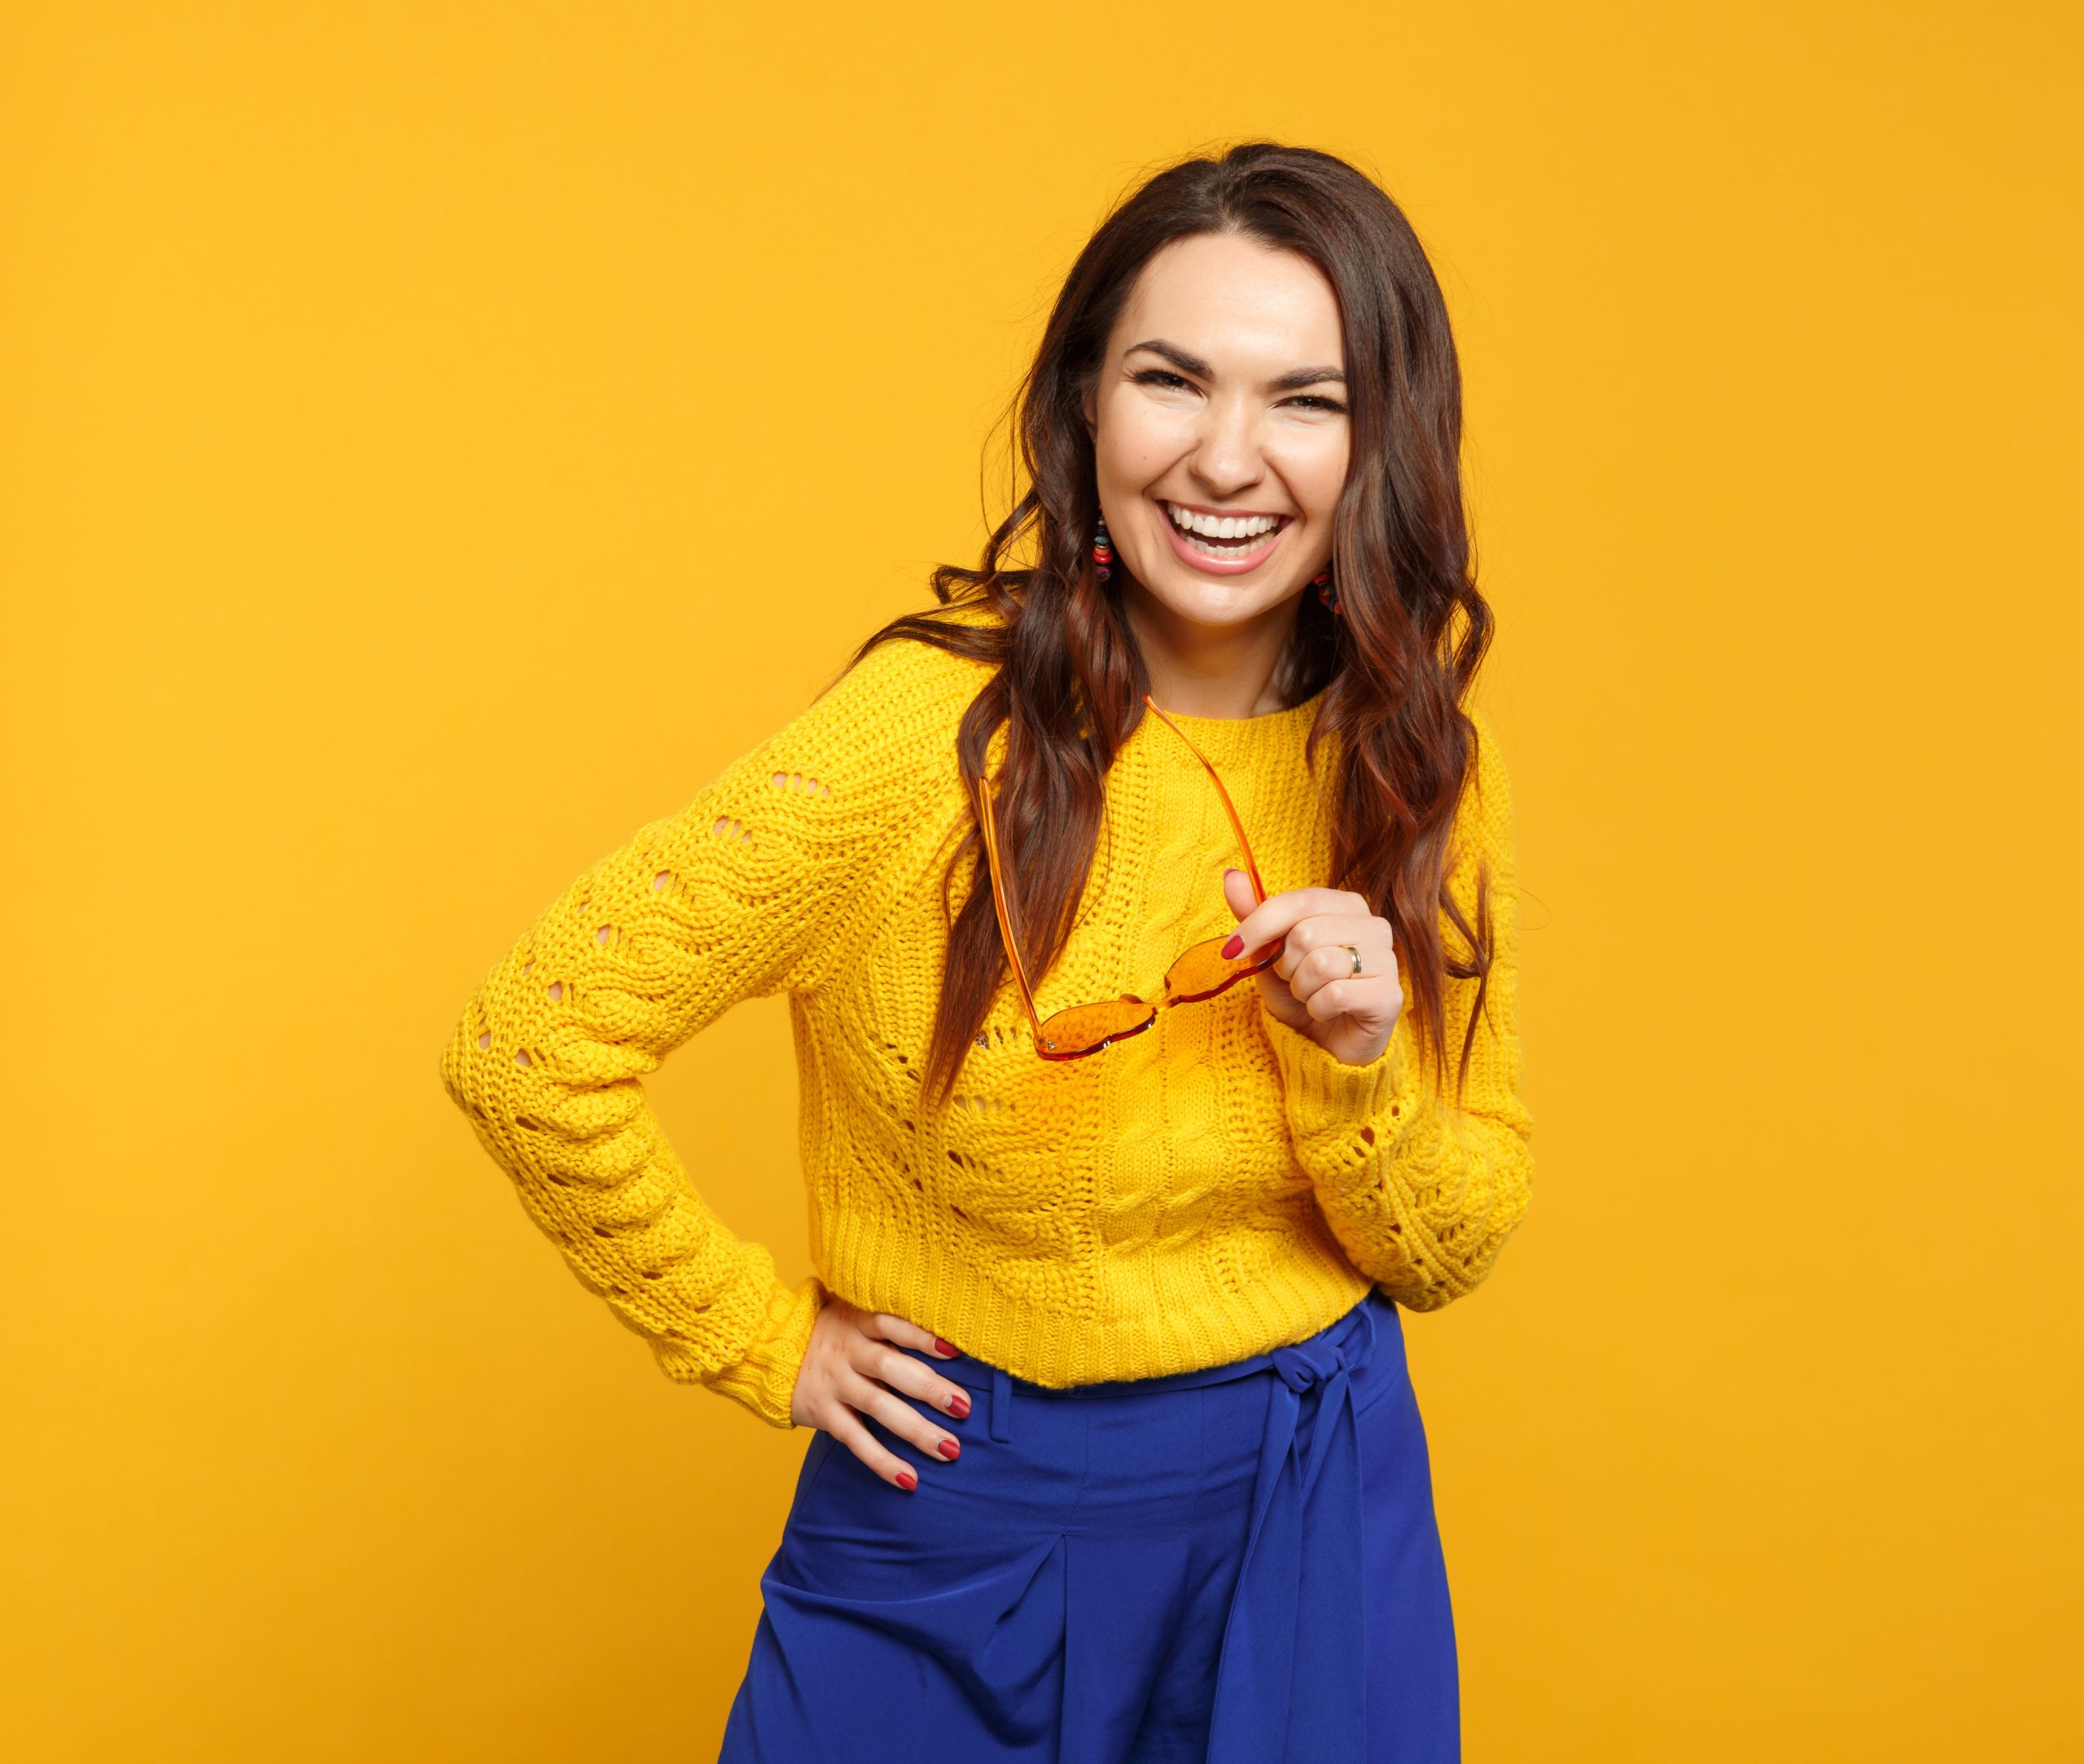 Portrait of laughing young woman in a yellow sweater and blue trousers holding glasses, standing, looking at the camera in front of a yellow-orange background